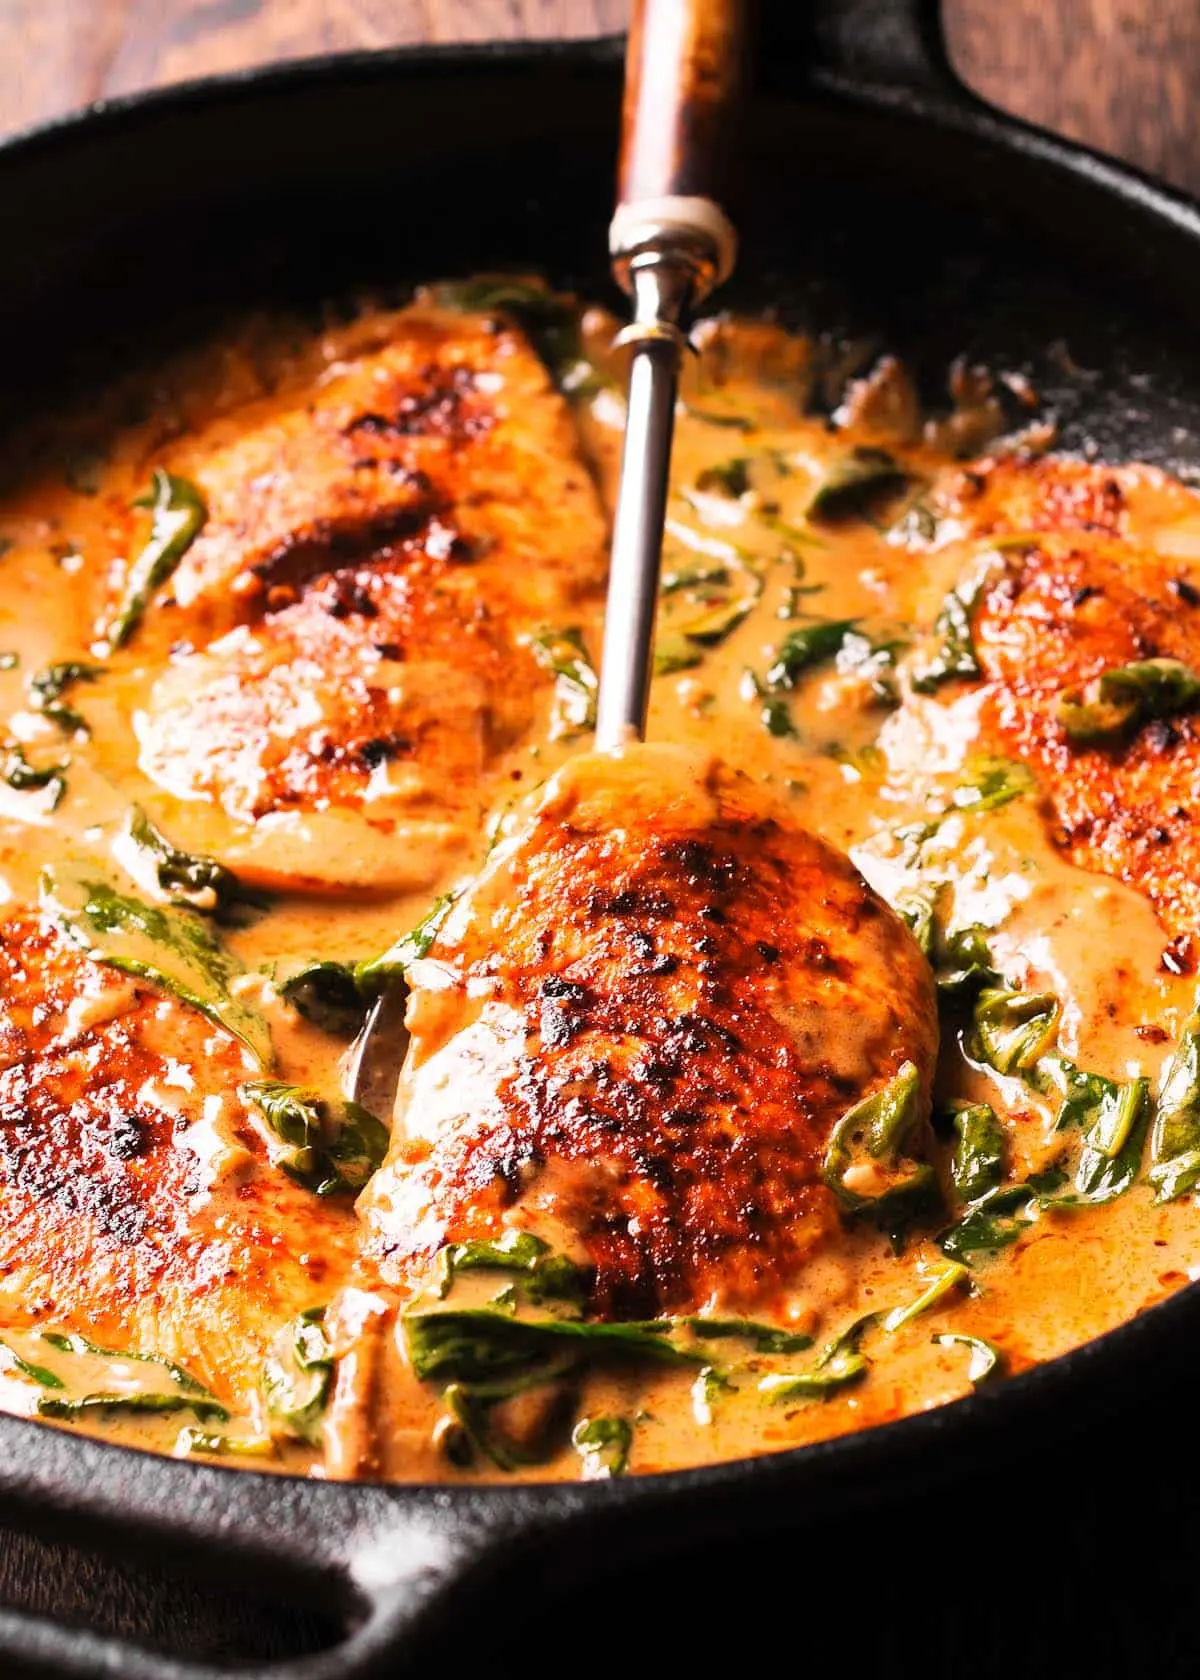 smoked paprika sauce for chicken - Why do people use paprika in chicken